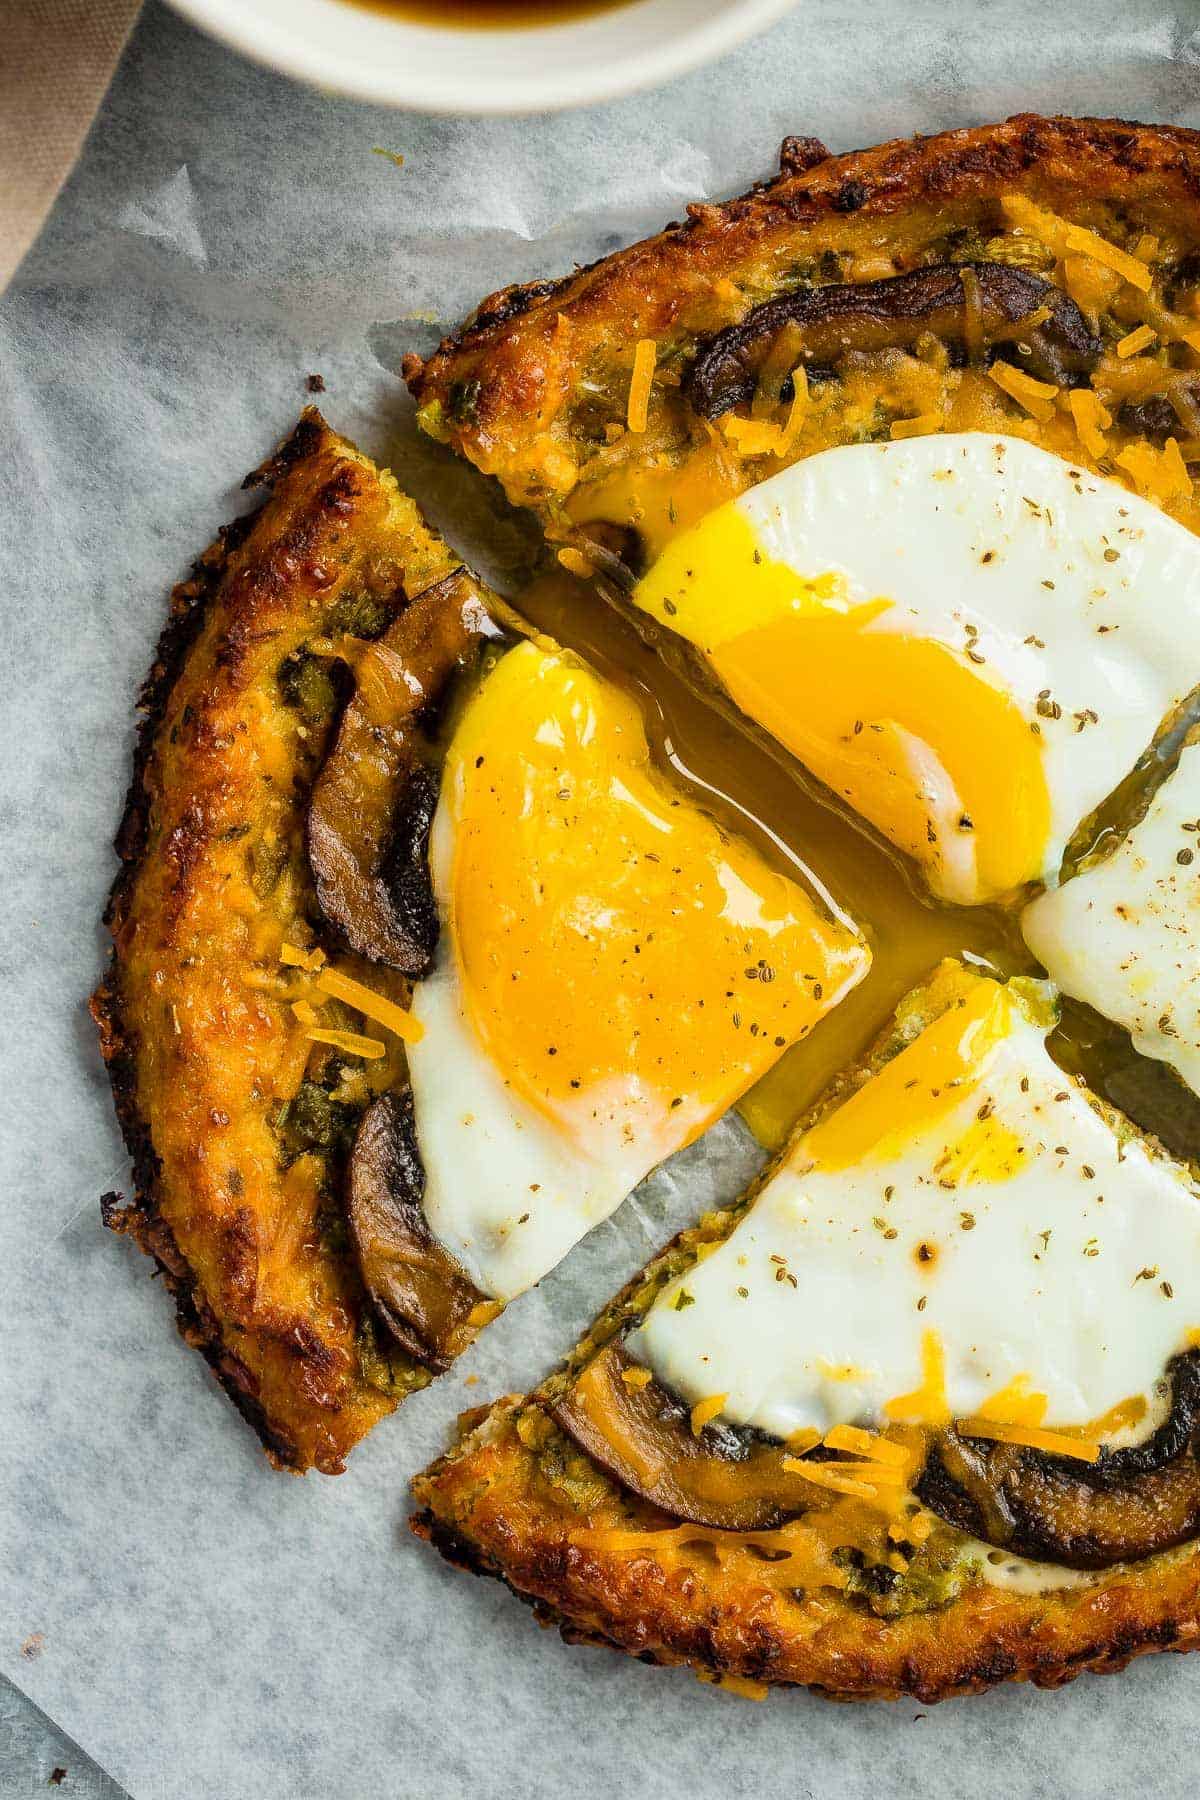 Bacon Pesto and Egg Cauliflower Breakfast Pizza - This healthy cauliflower pizza has soft eggs and a leek-bacon pesto. You'll never know it's secretly high in protein, gluten free and low carb! Perfect for breakfast or brinner! | Foodfaithfitness.com | @FoodFaithFit